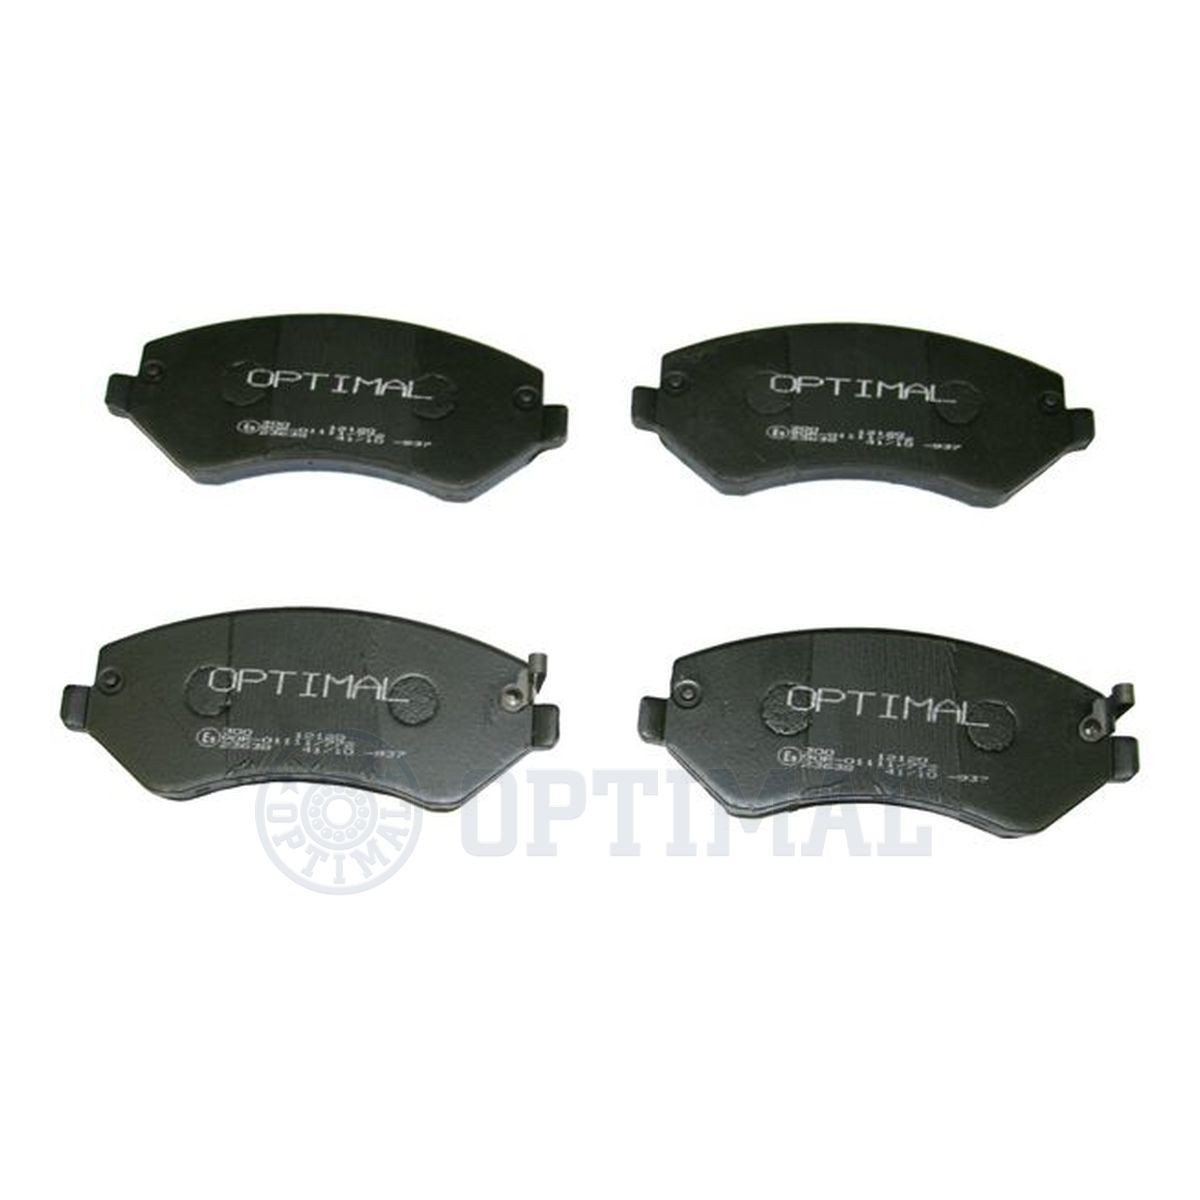 OPTIMAL BP-12120 Brake pad set Front Axle, with acoustic wear warning